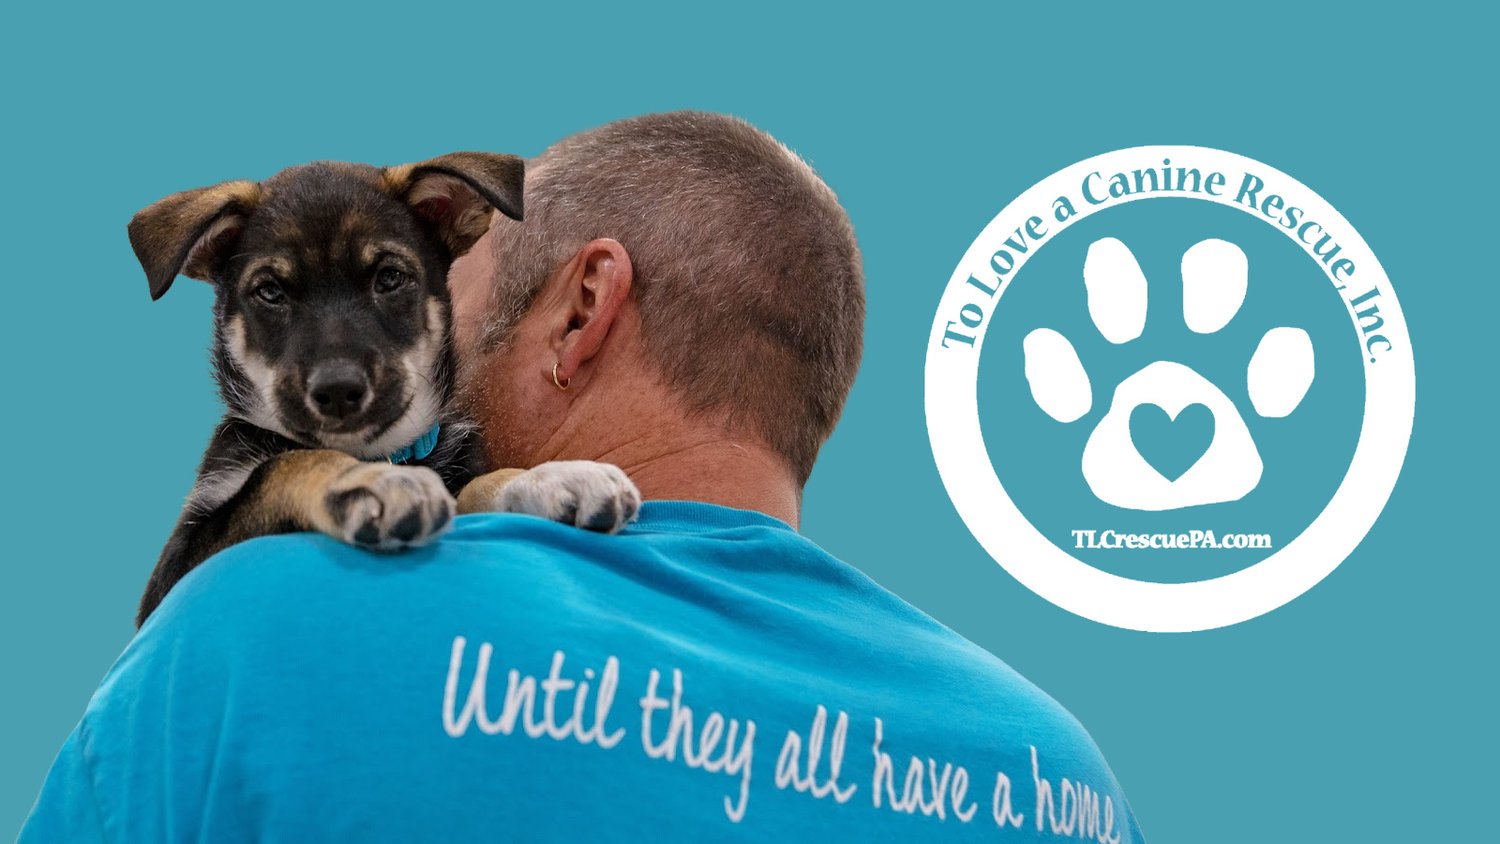 To Love a Canine Rescue, Inc.